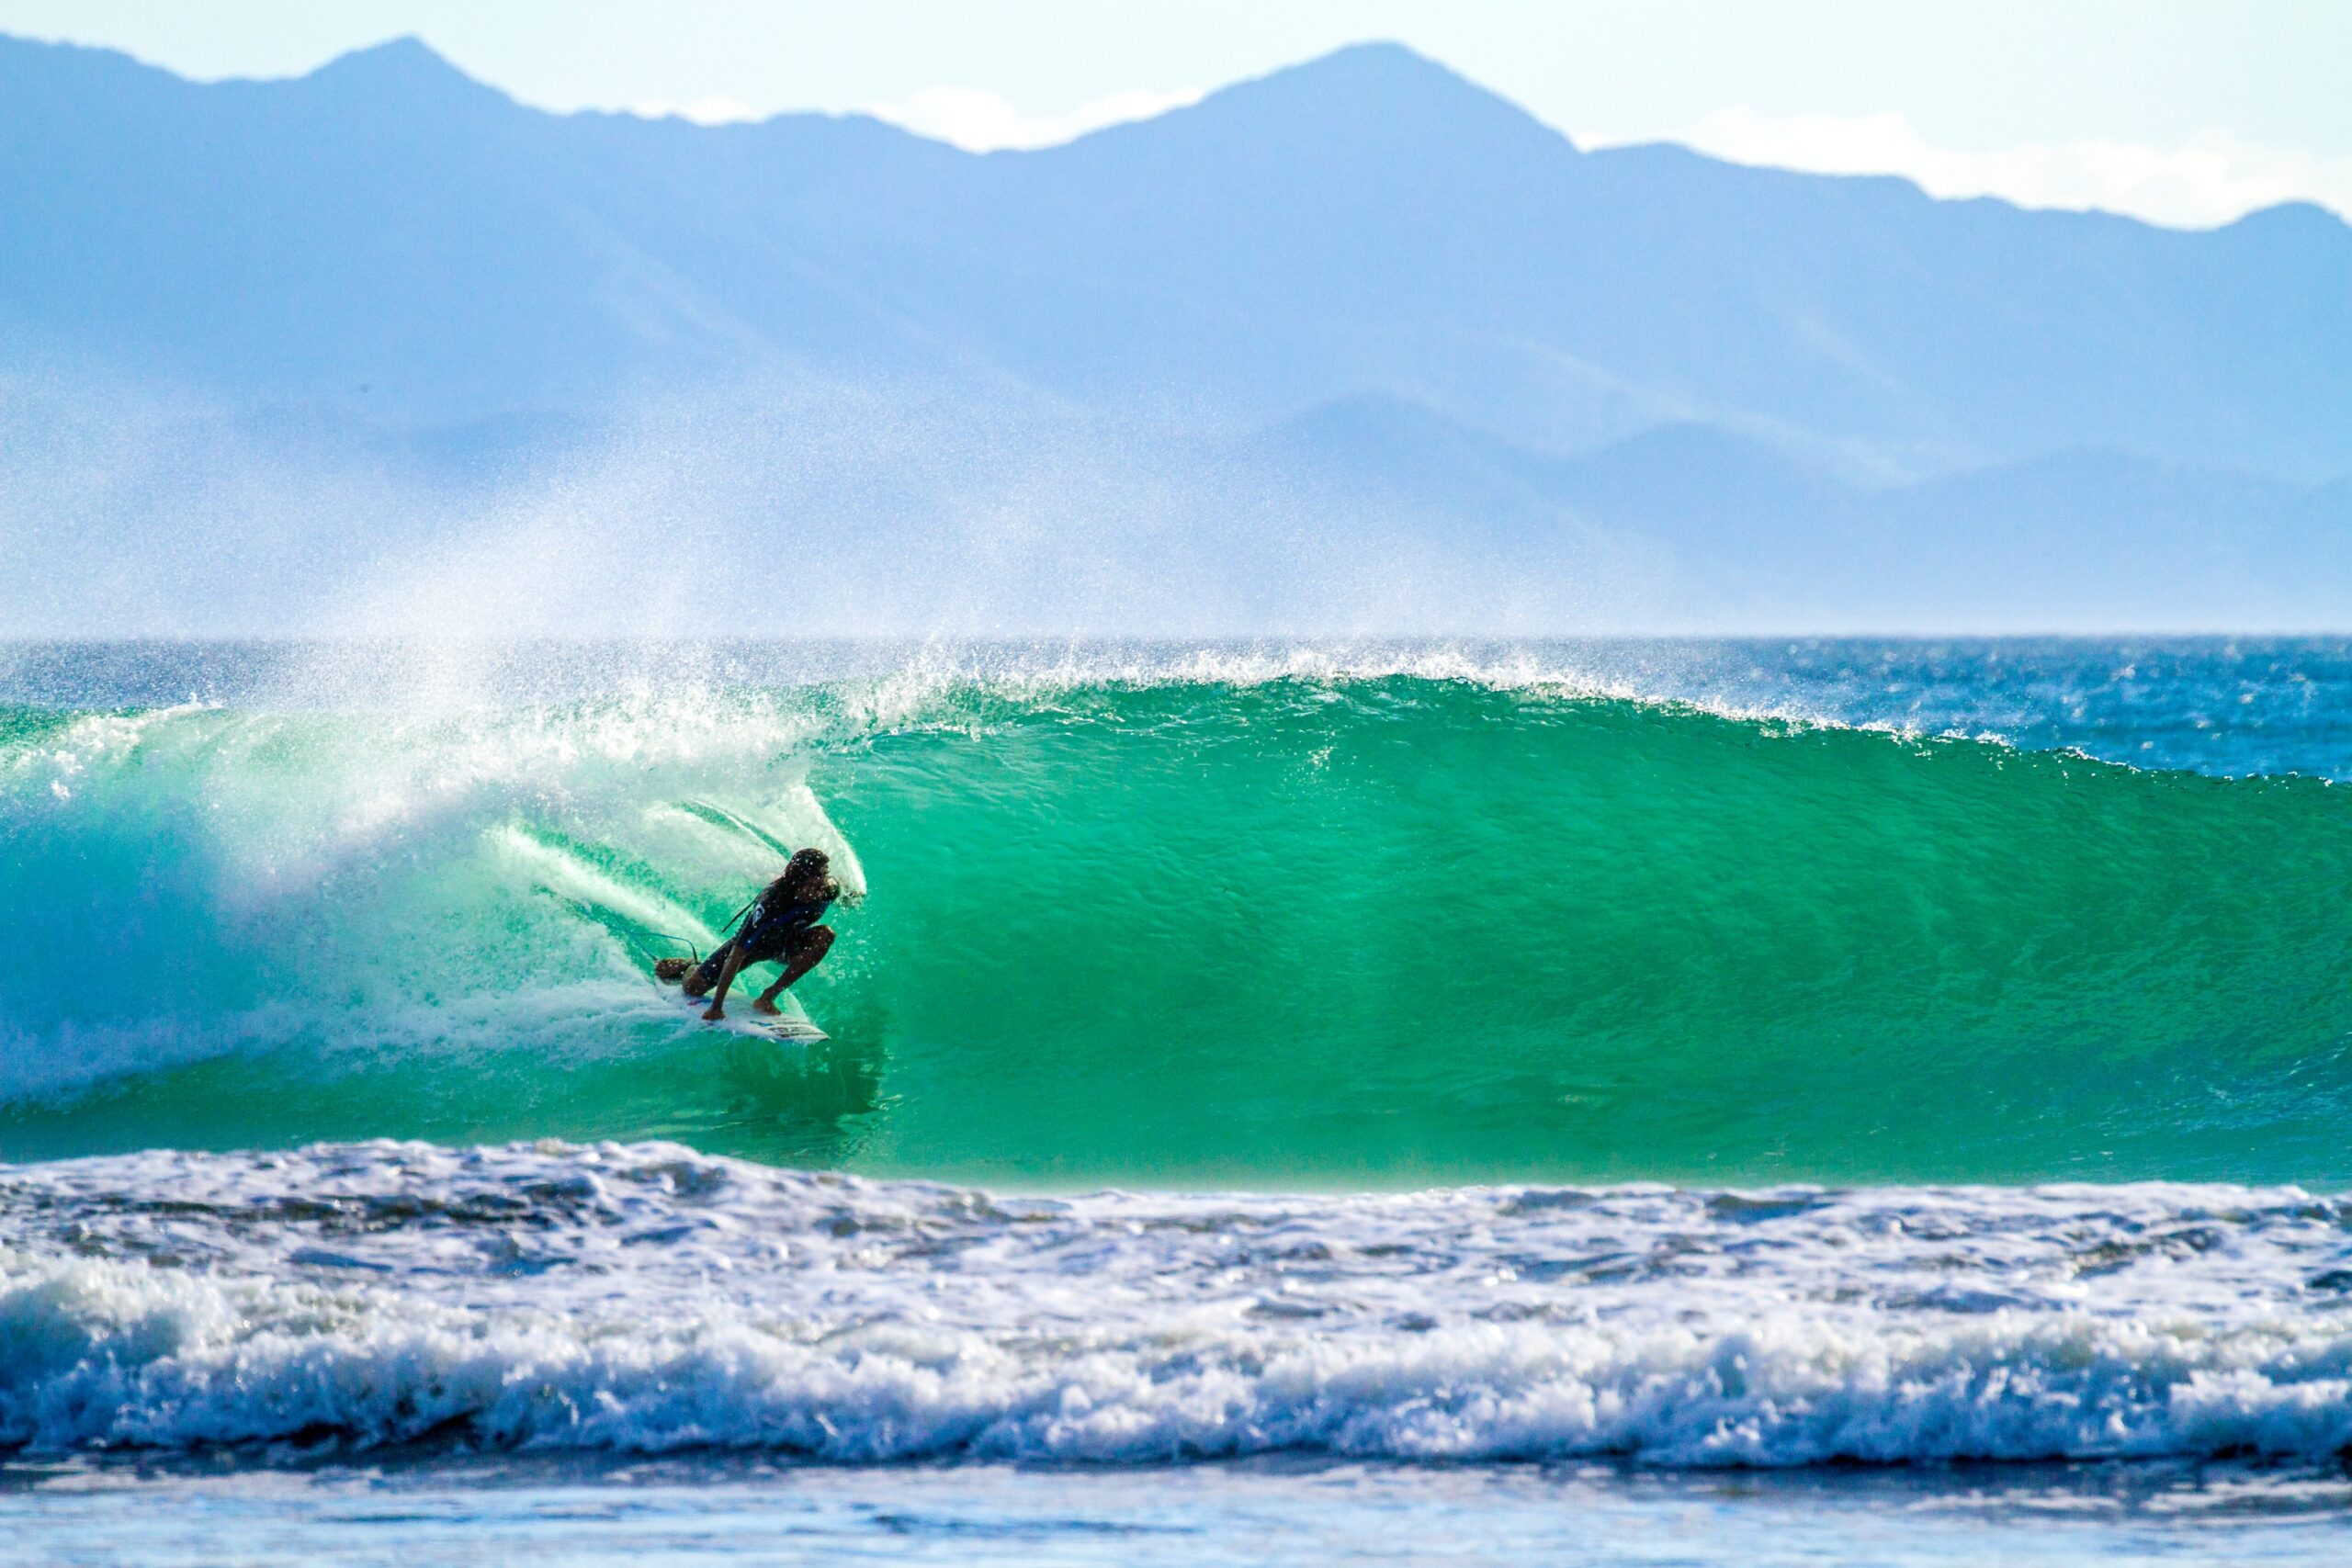 A local surfer shows how it is done in a secret spot in Nicaragua